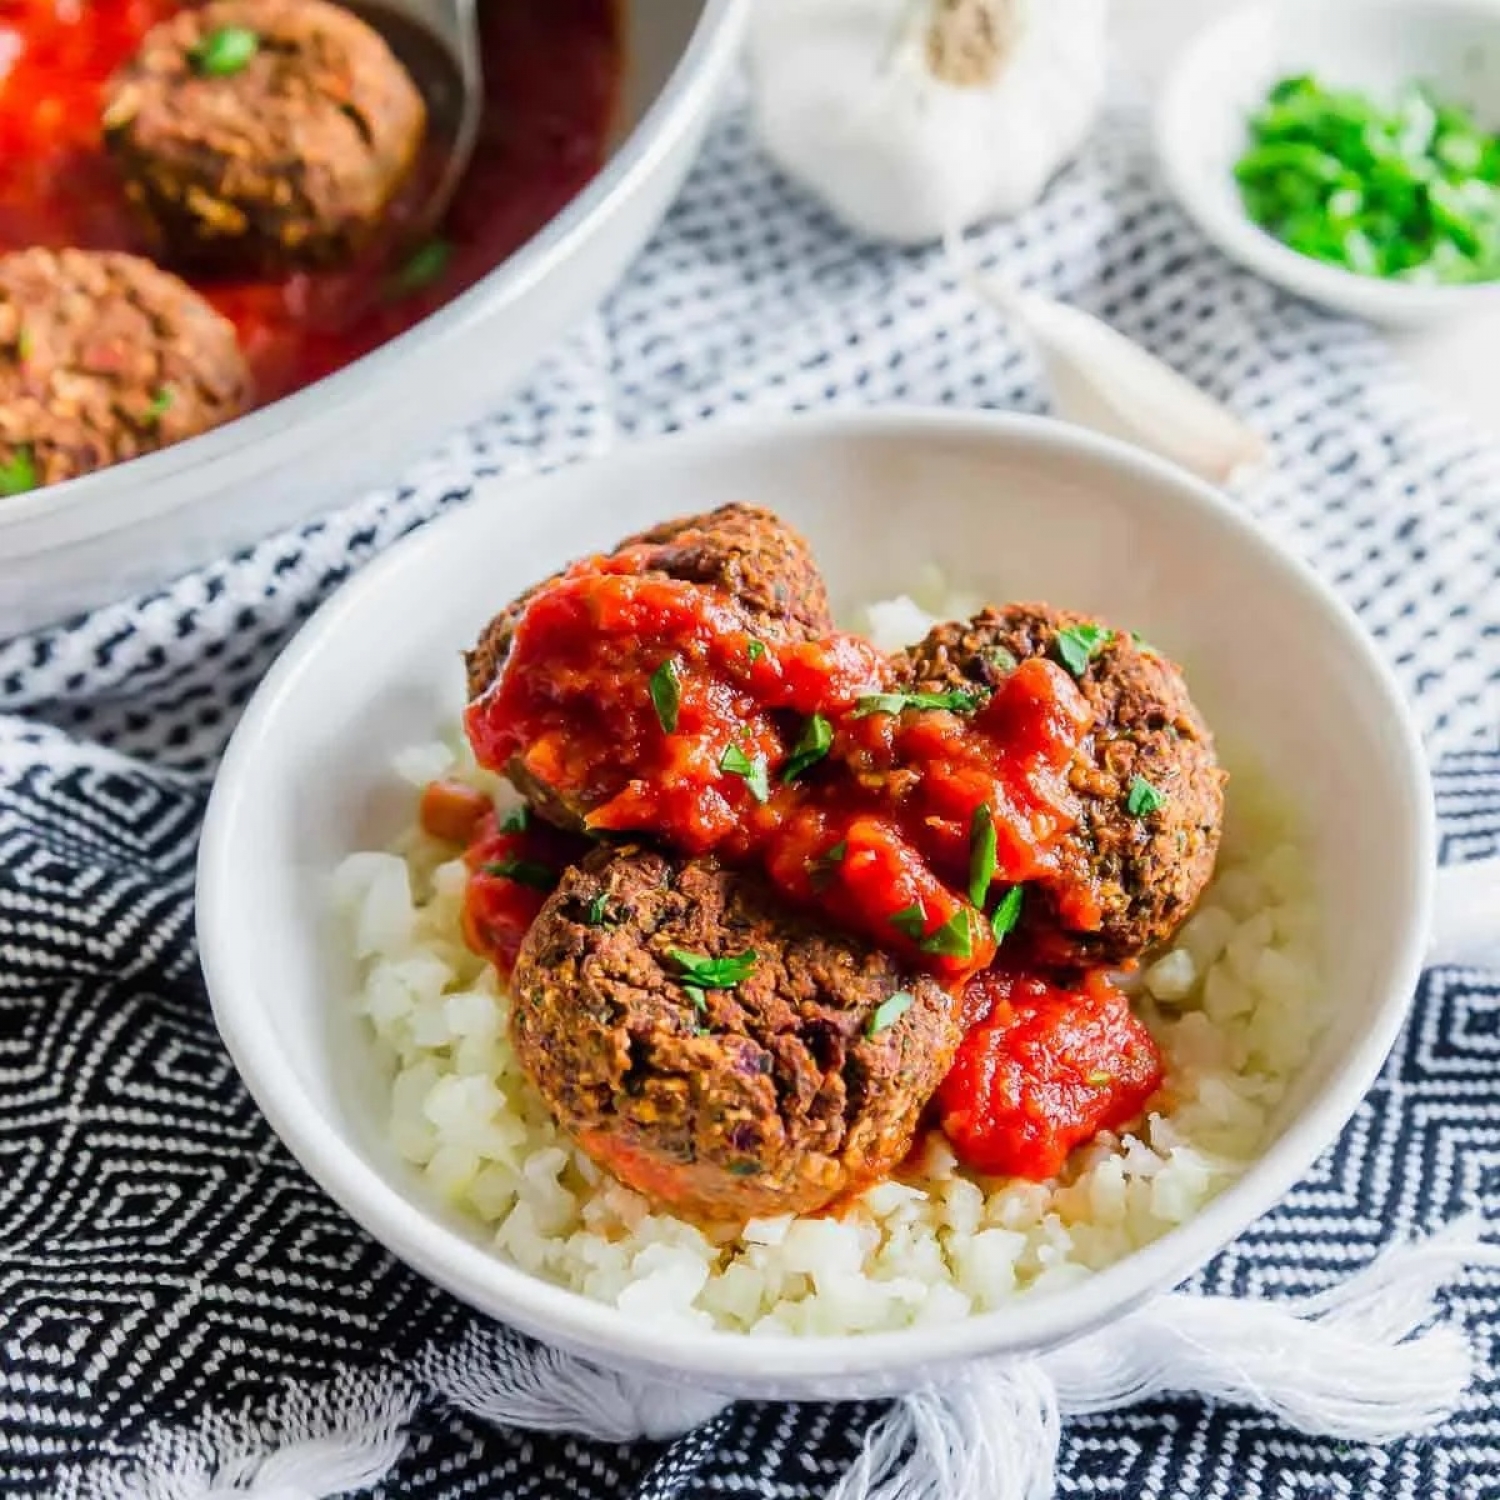 <p>These meatless 'meatballs' get their great compact texture from canned black beans, chopped veggies and rolled oats. They're great served Italian-style with your favorite pasta sauce and a low-carb "grain" substitute (or go ahead and have the pasta). <a href="https://www.runningtothekitchen.com/black-bean-meatballs/" rel="noopener">Get the recipe here.</a></p>